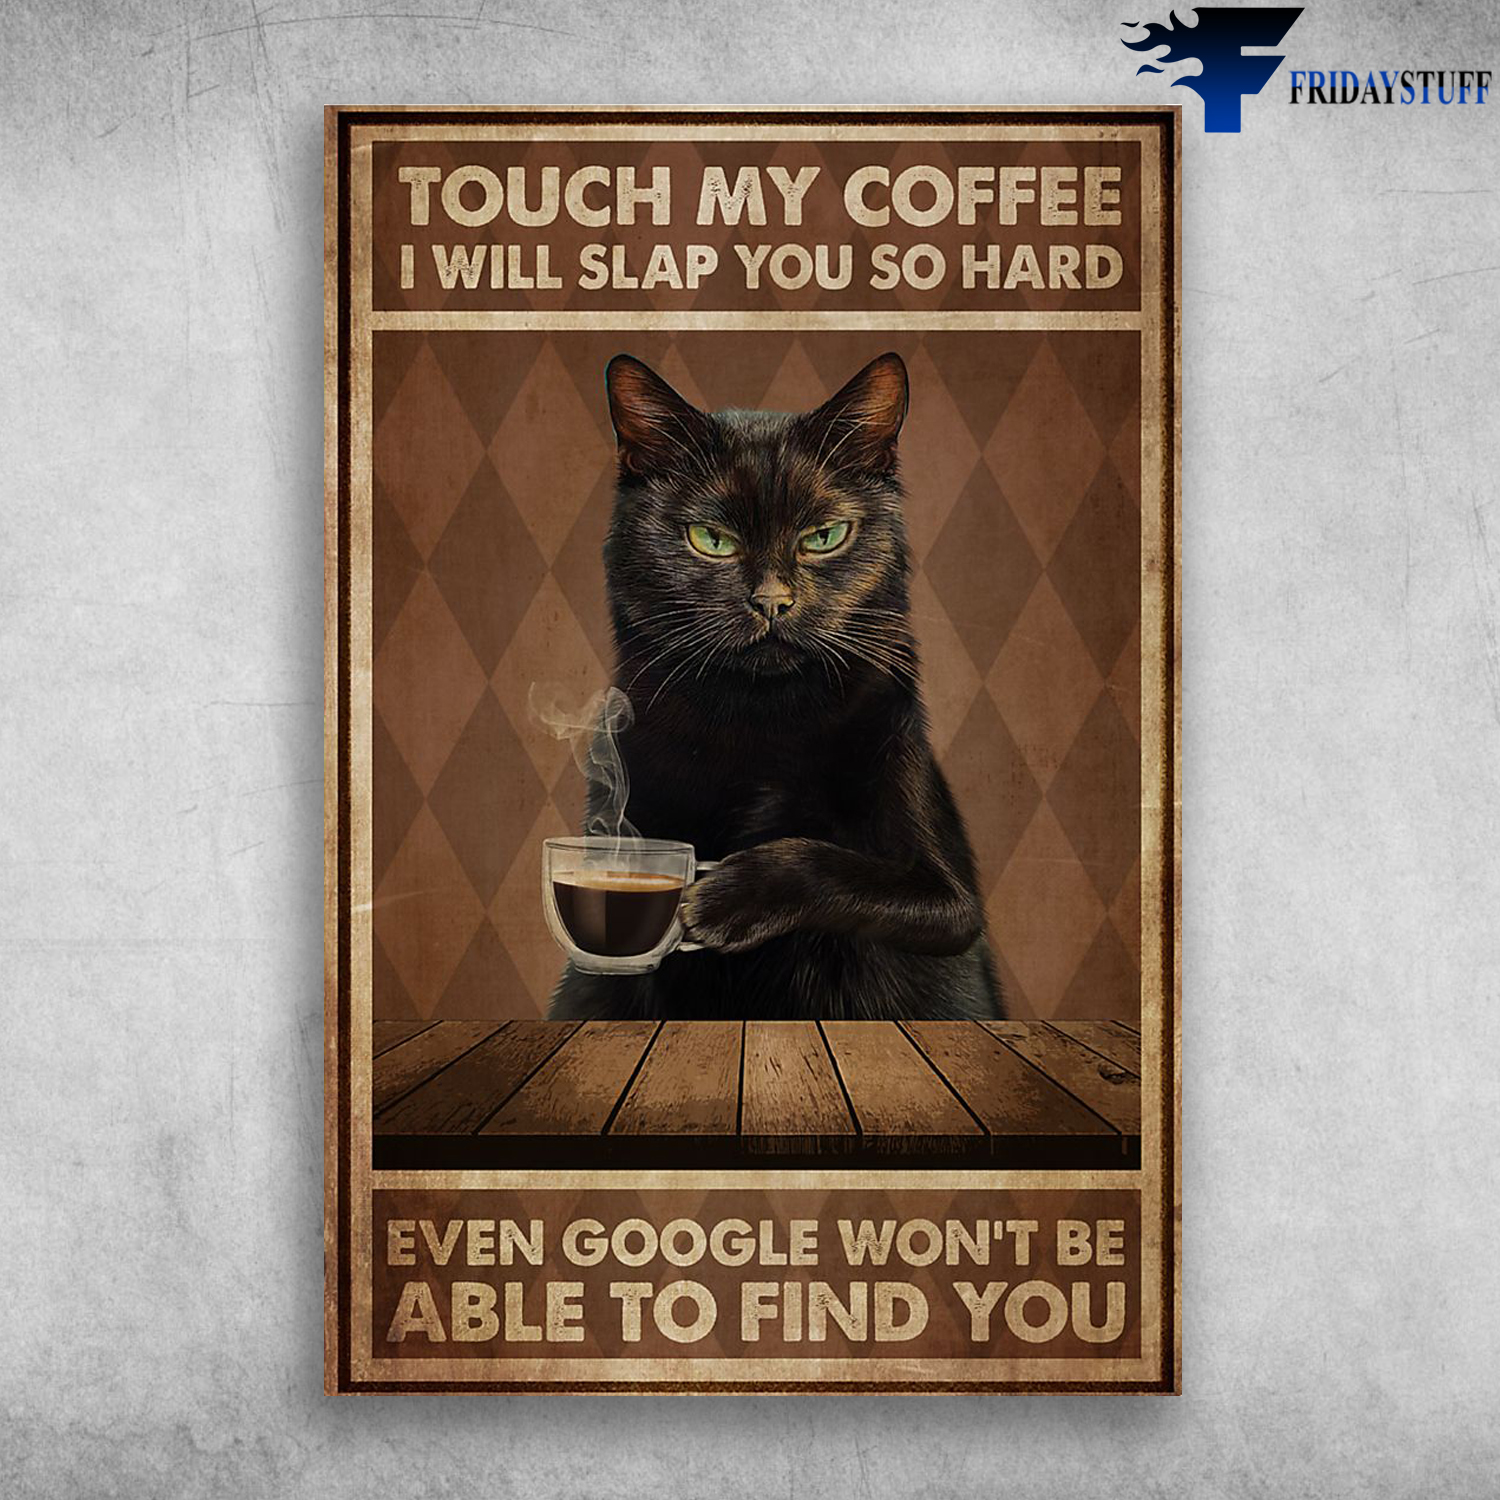 Black Cat Love Coffee - Touch My Coffee, I Will Slap You So Hard, Even Google Won't Be Able To Find You